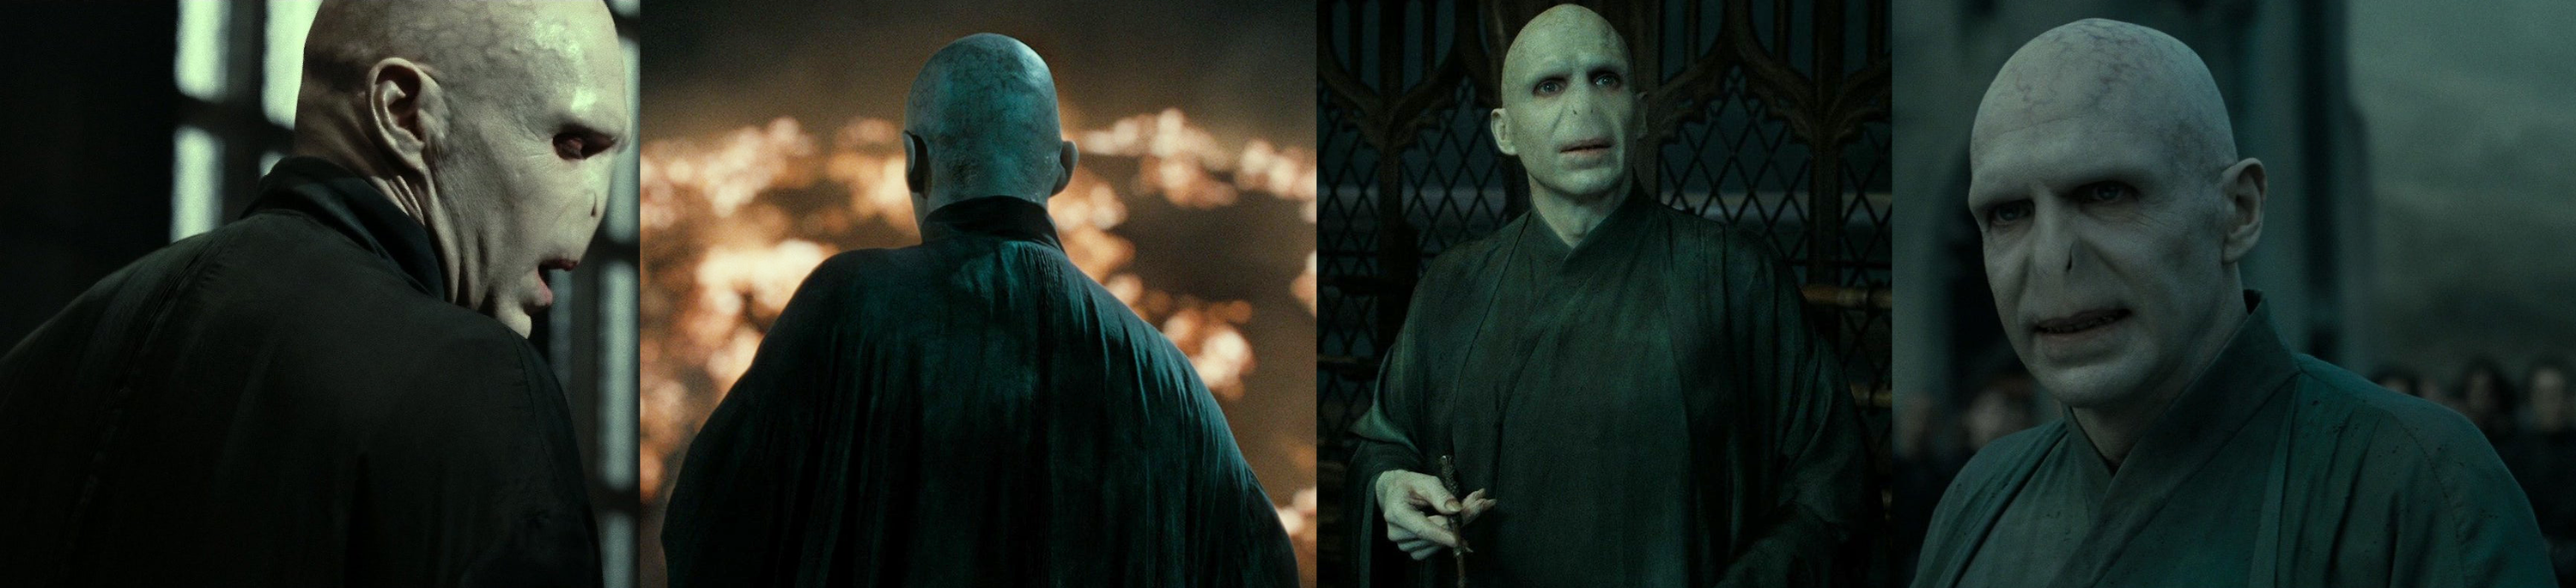 Voldemort in a black robe and then three more scenes where the robe looks lighter and dustier